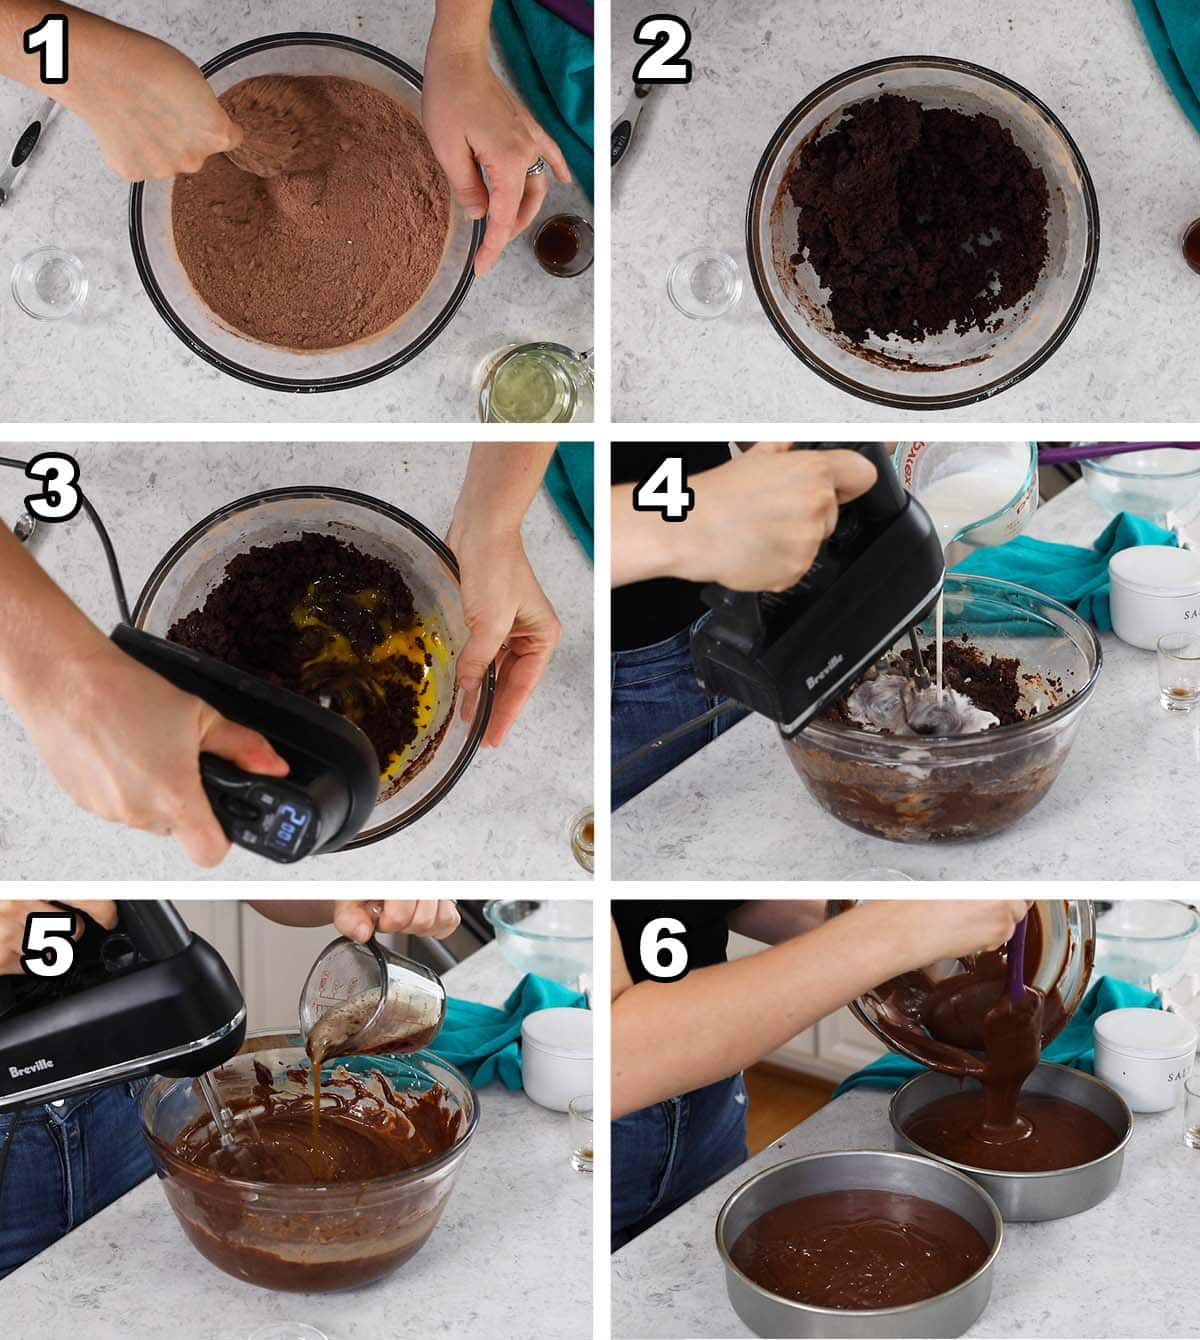 Six photos showing chocolate cake batter being prepared and portioned into two cake pans.